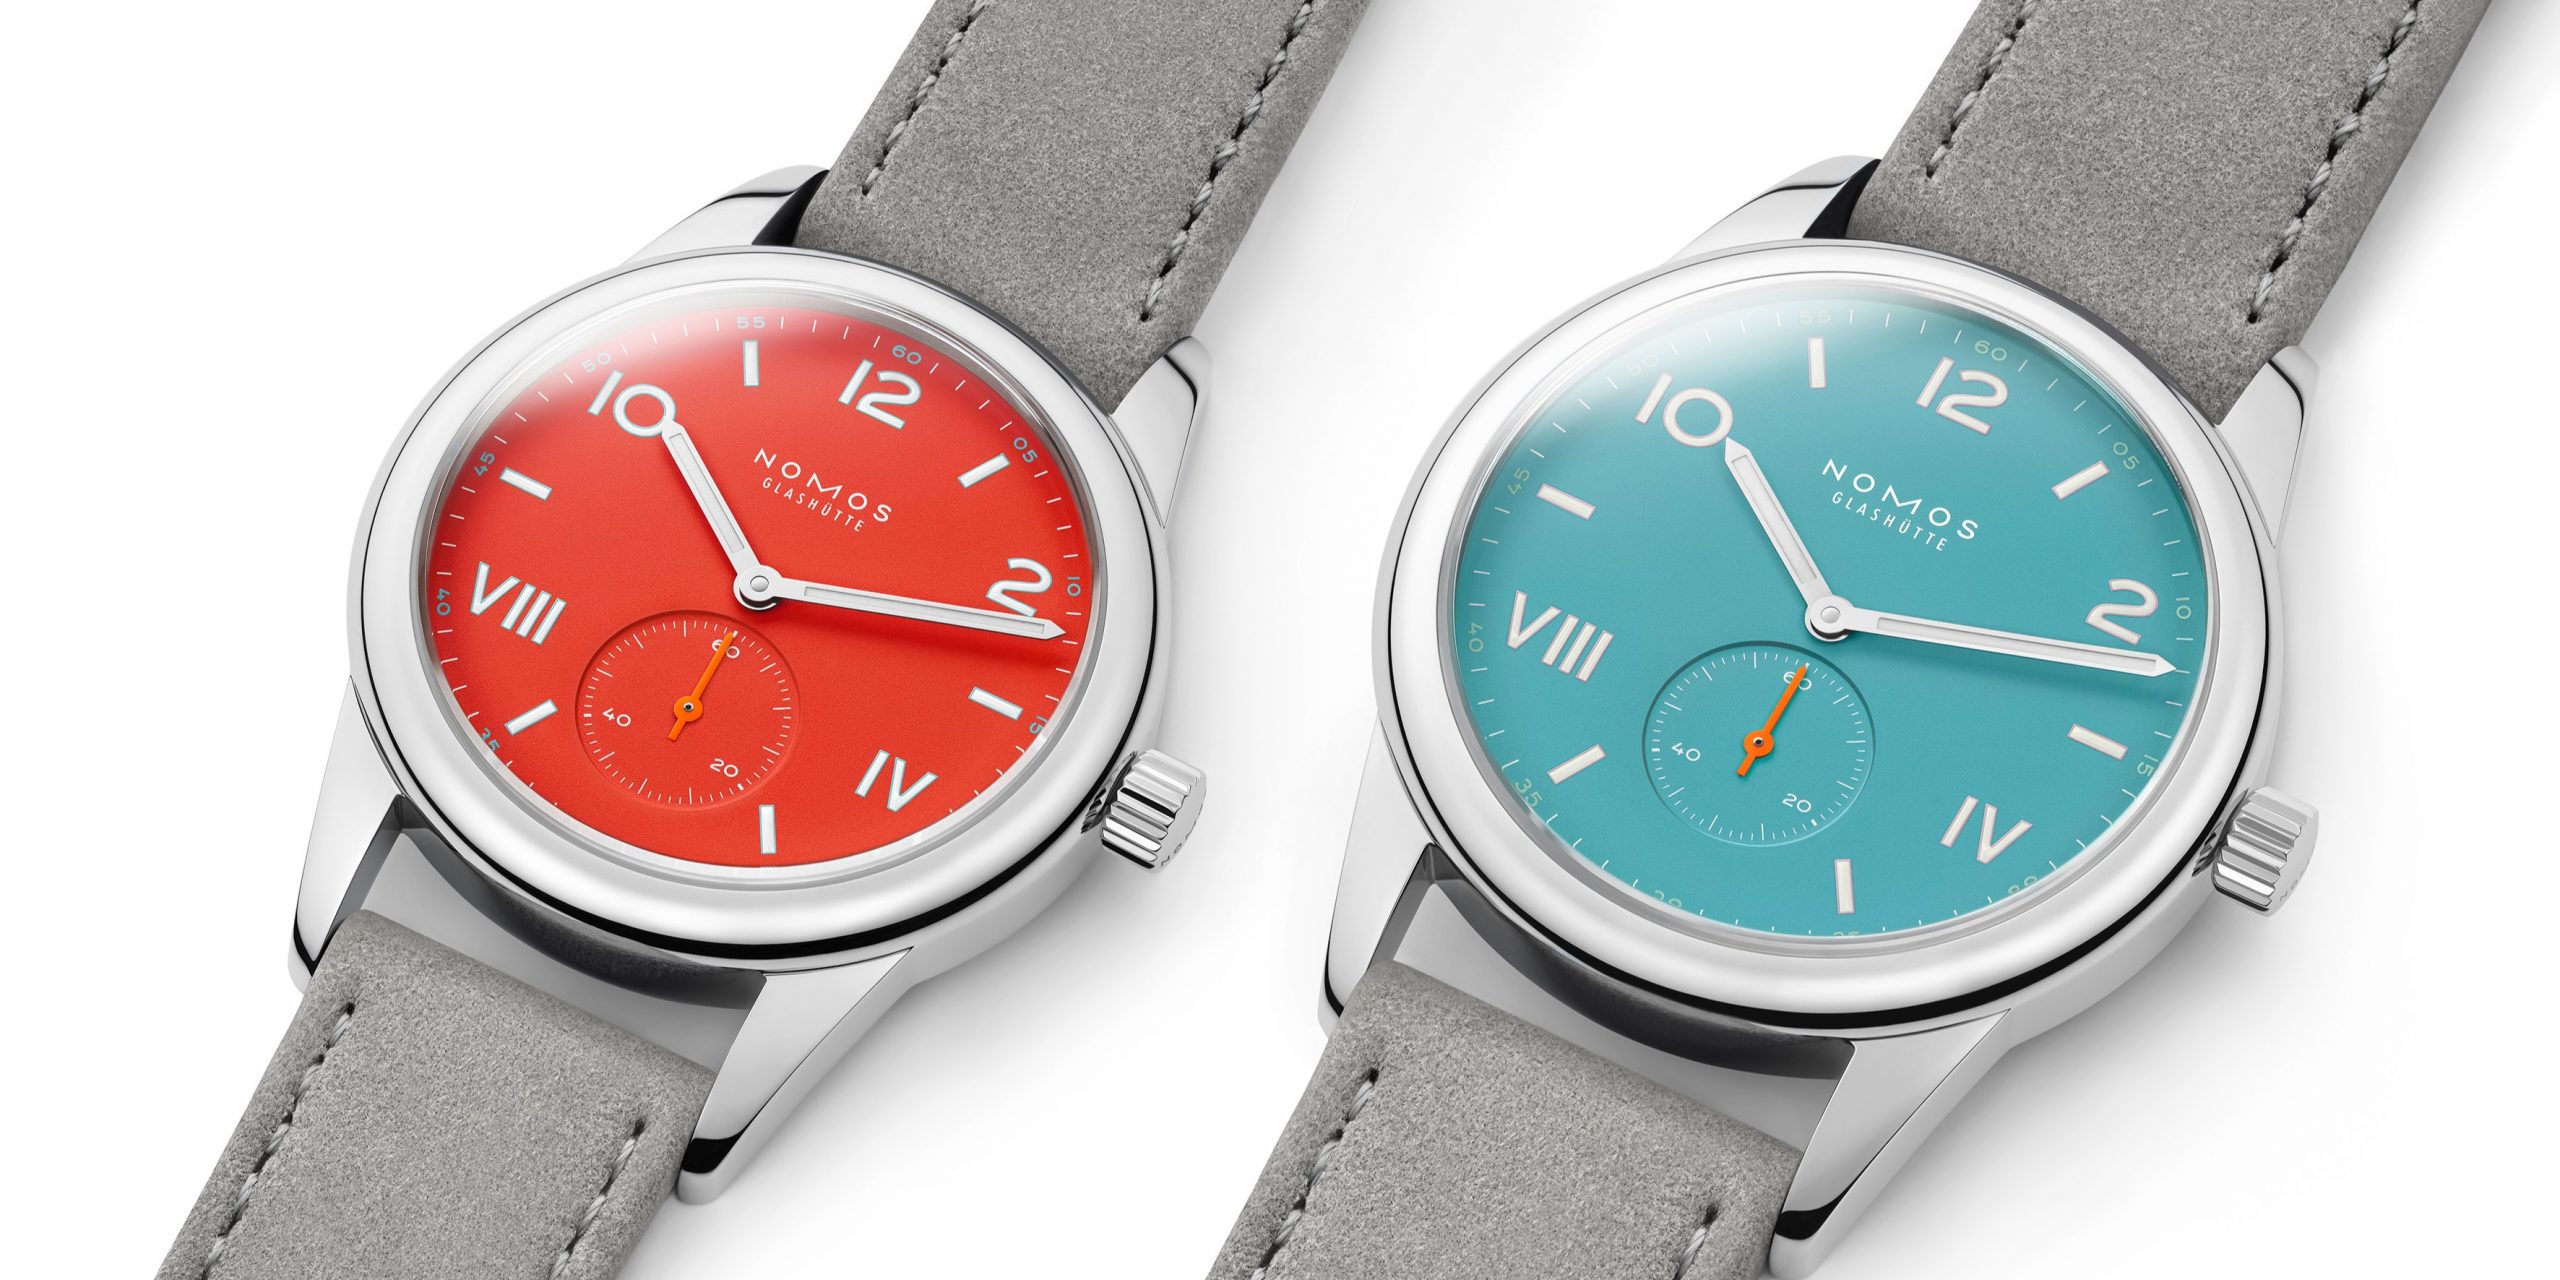 NOMOS Glashütte unveils four new Club Campus references in Nonstop Red and Endless Blue